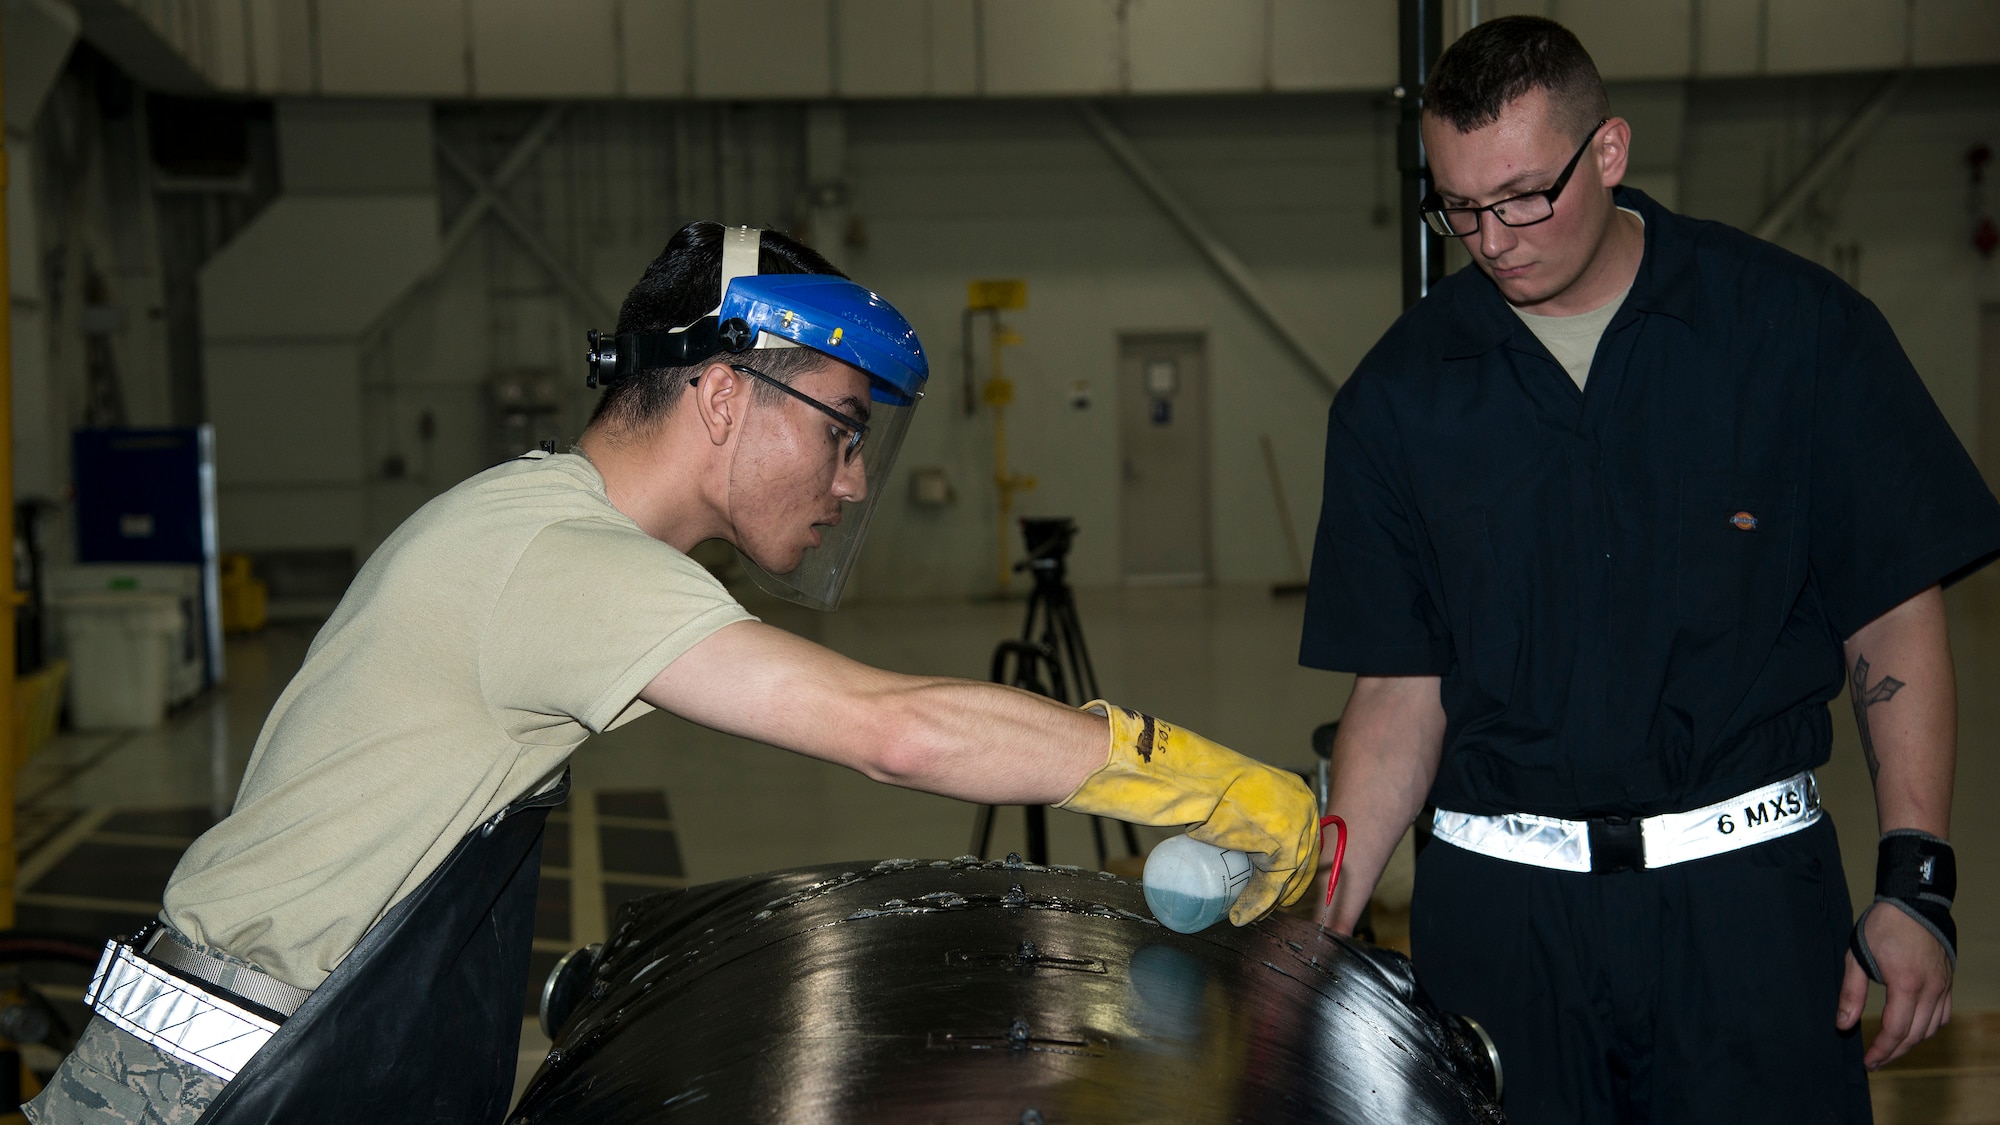 U.S. Air Force Airman 1st Class Luis Garcia-Munoz, a 6th Maintenance Squadron (MXS) fuels system apprentice, and Staff Sgt. Dakota Williamson, a 6th MXS fuels system craftsman, test a fuel cell bladder for leaks at MacDill Air Force Base, Fla., Nov. 25, 2019.